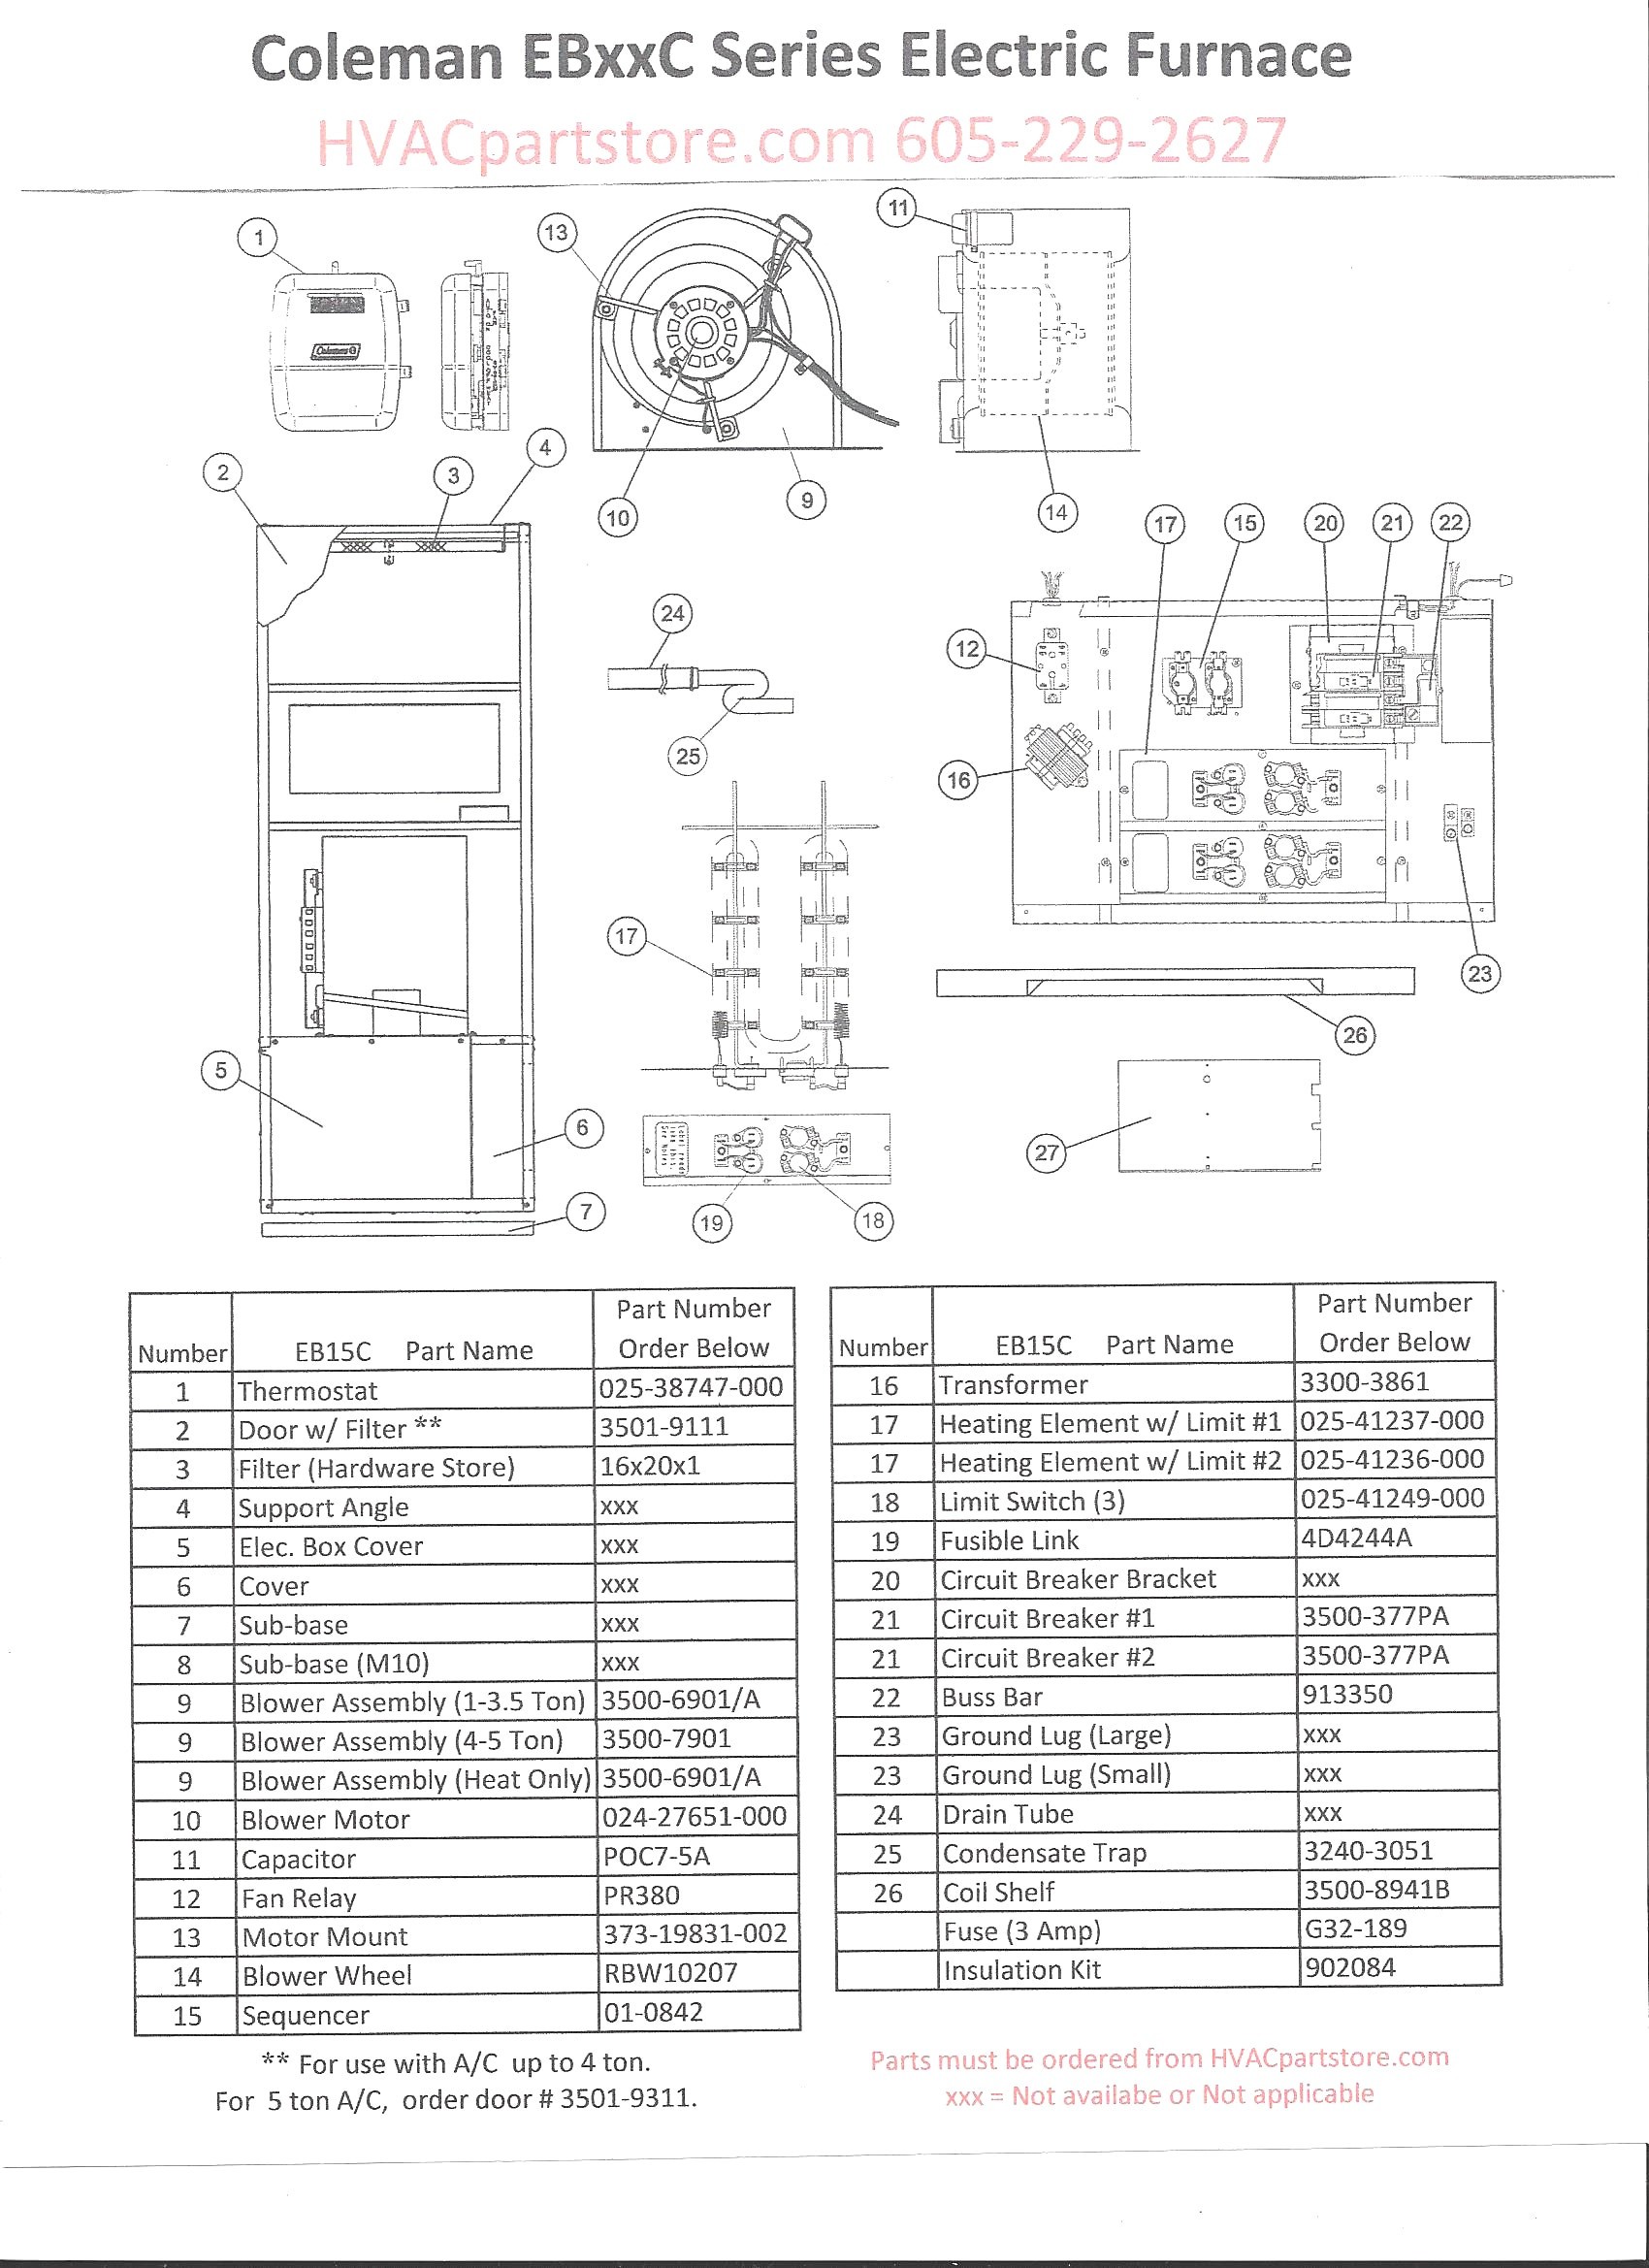 Coleman Electric Furnace Wiring Diagram And